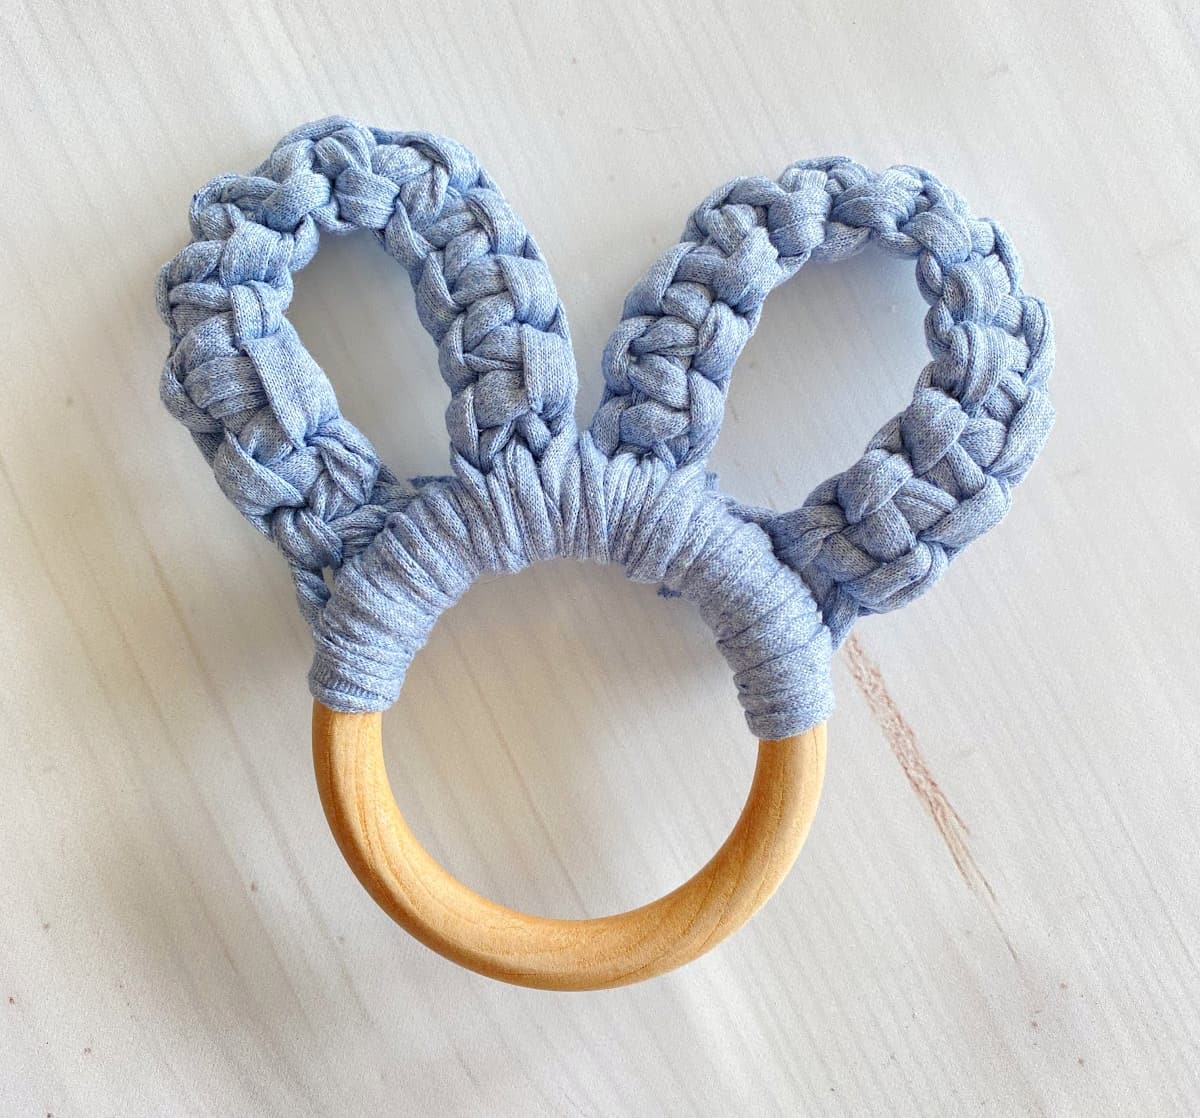 Macrame Rings : 5 Steps (with Pictures) - Instructables